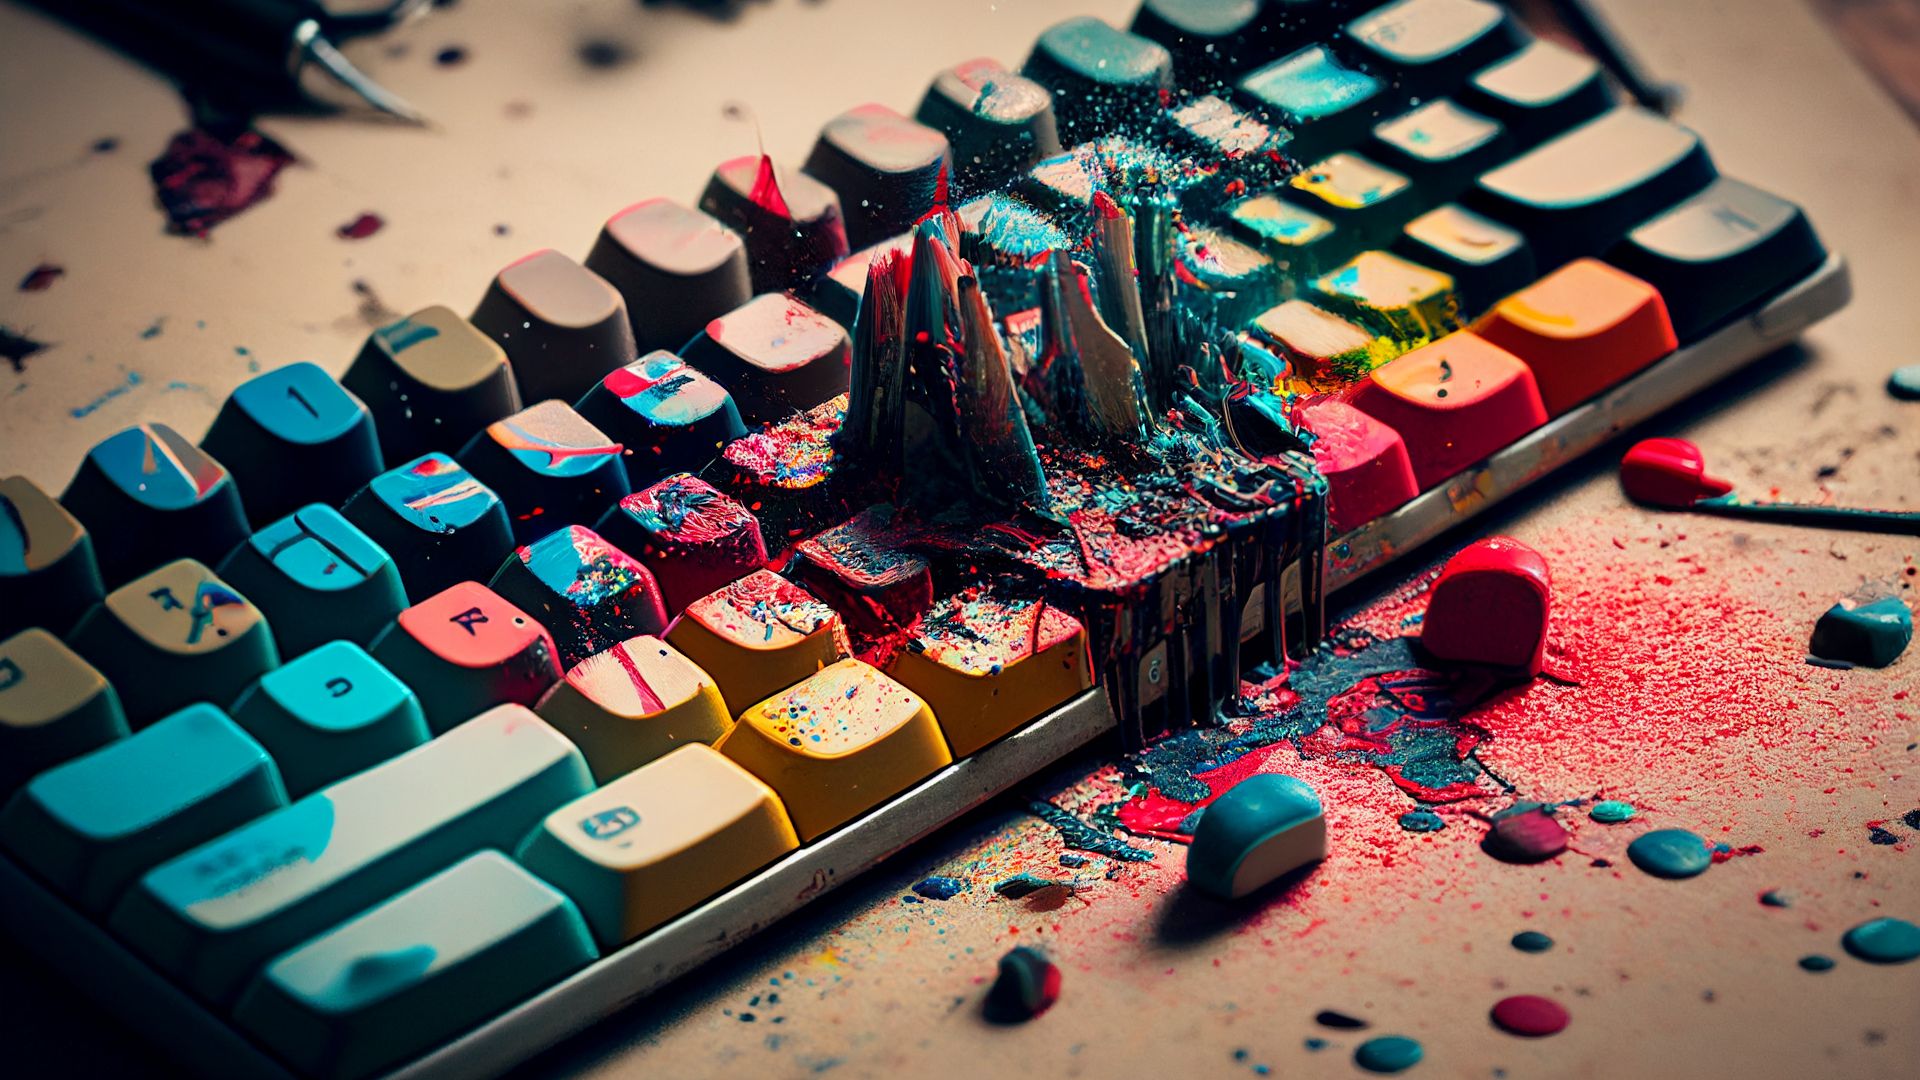 A computer keyboard with paint on it.